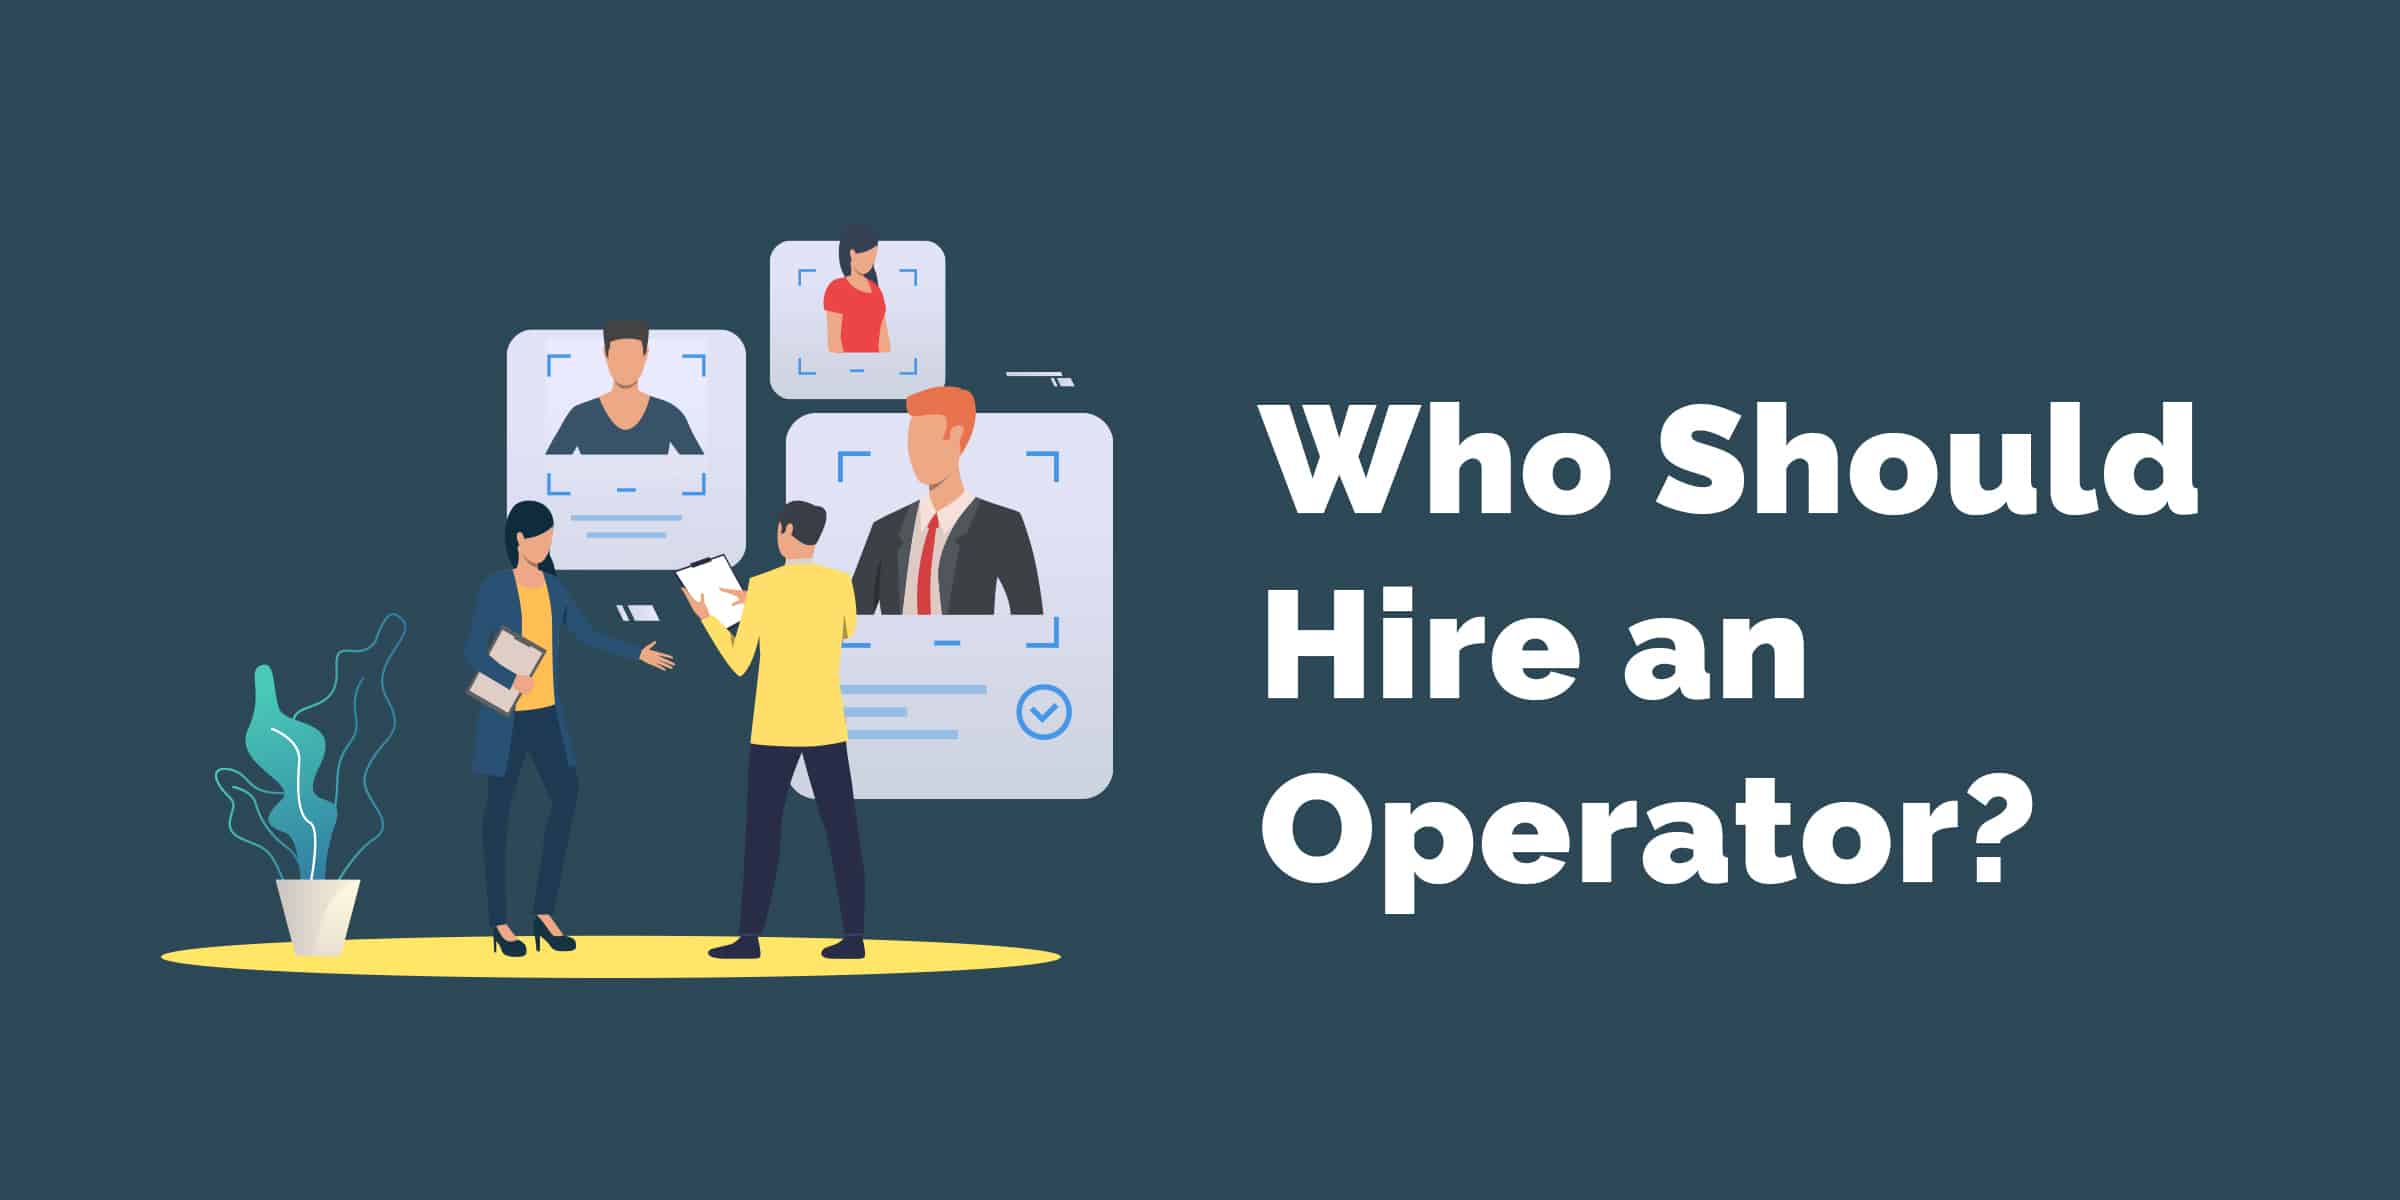 Who Should Hire an Operator